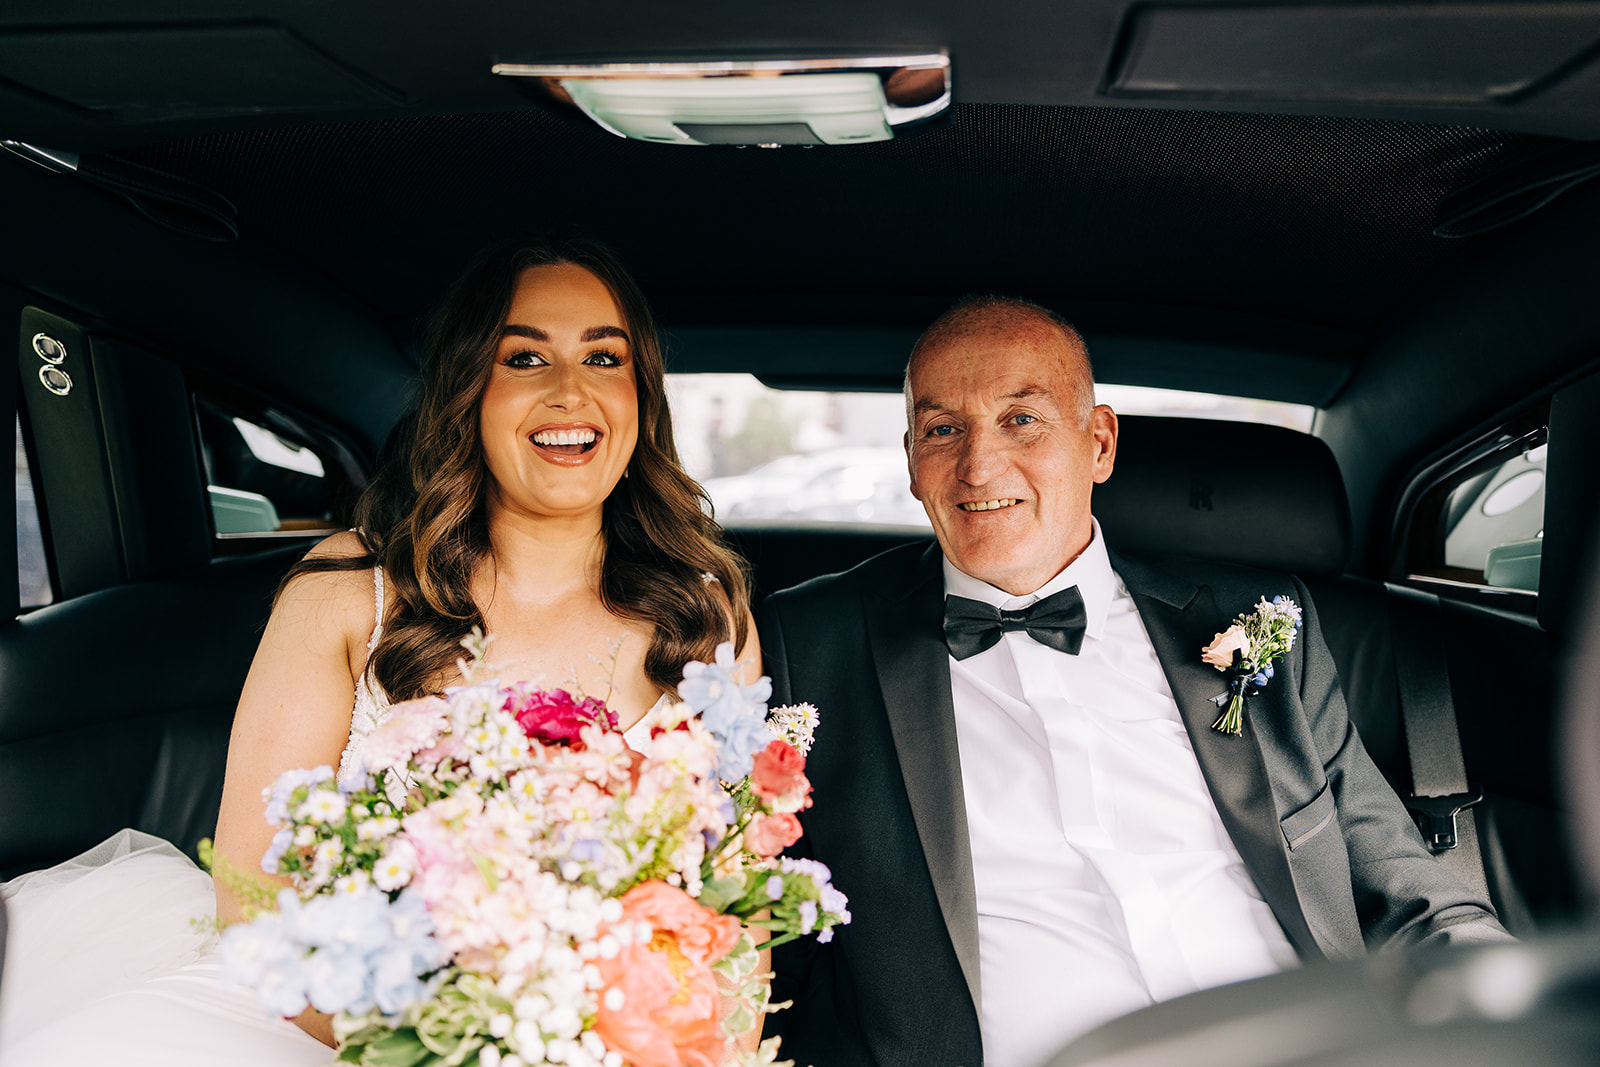 Bride and her father in wedding car on the way to church